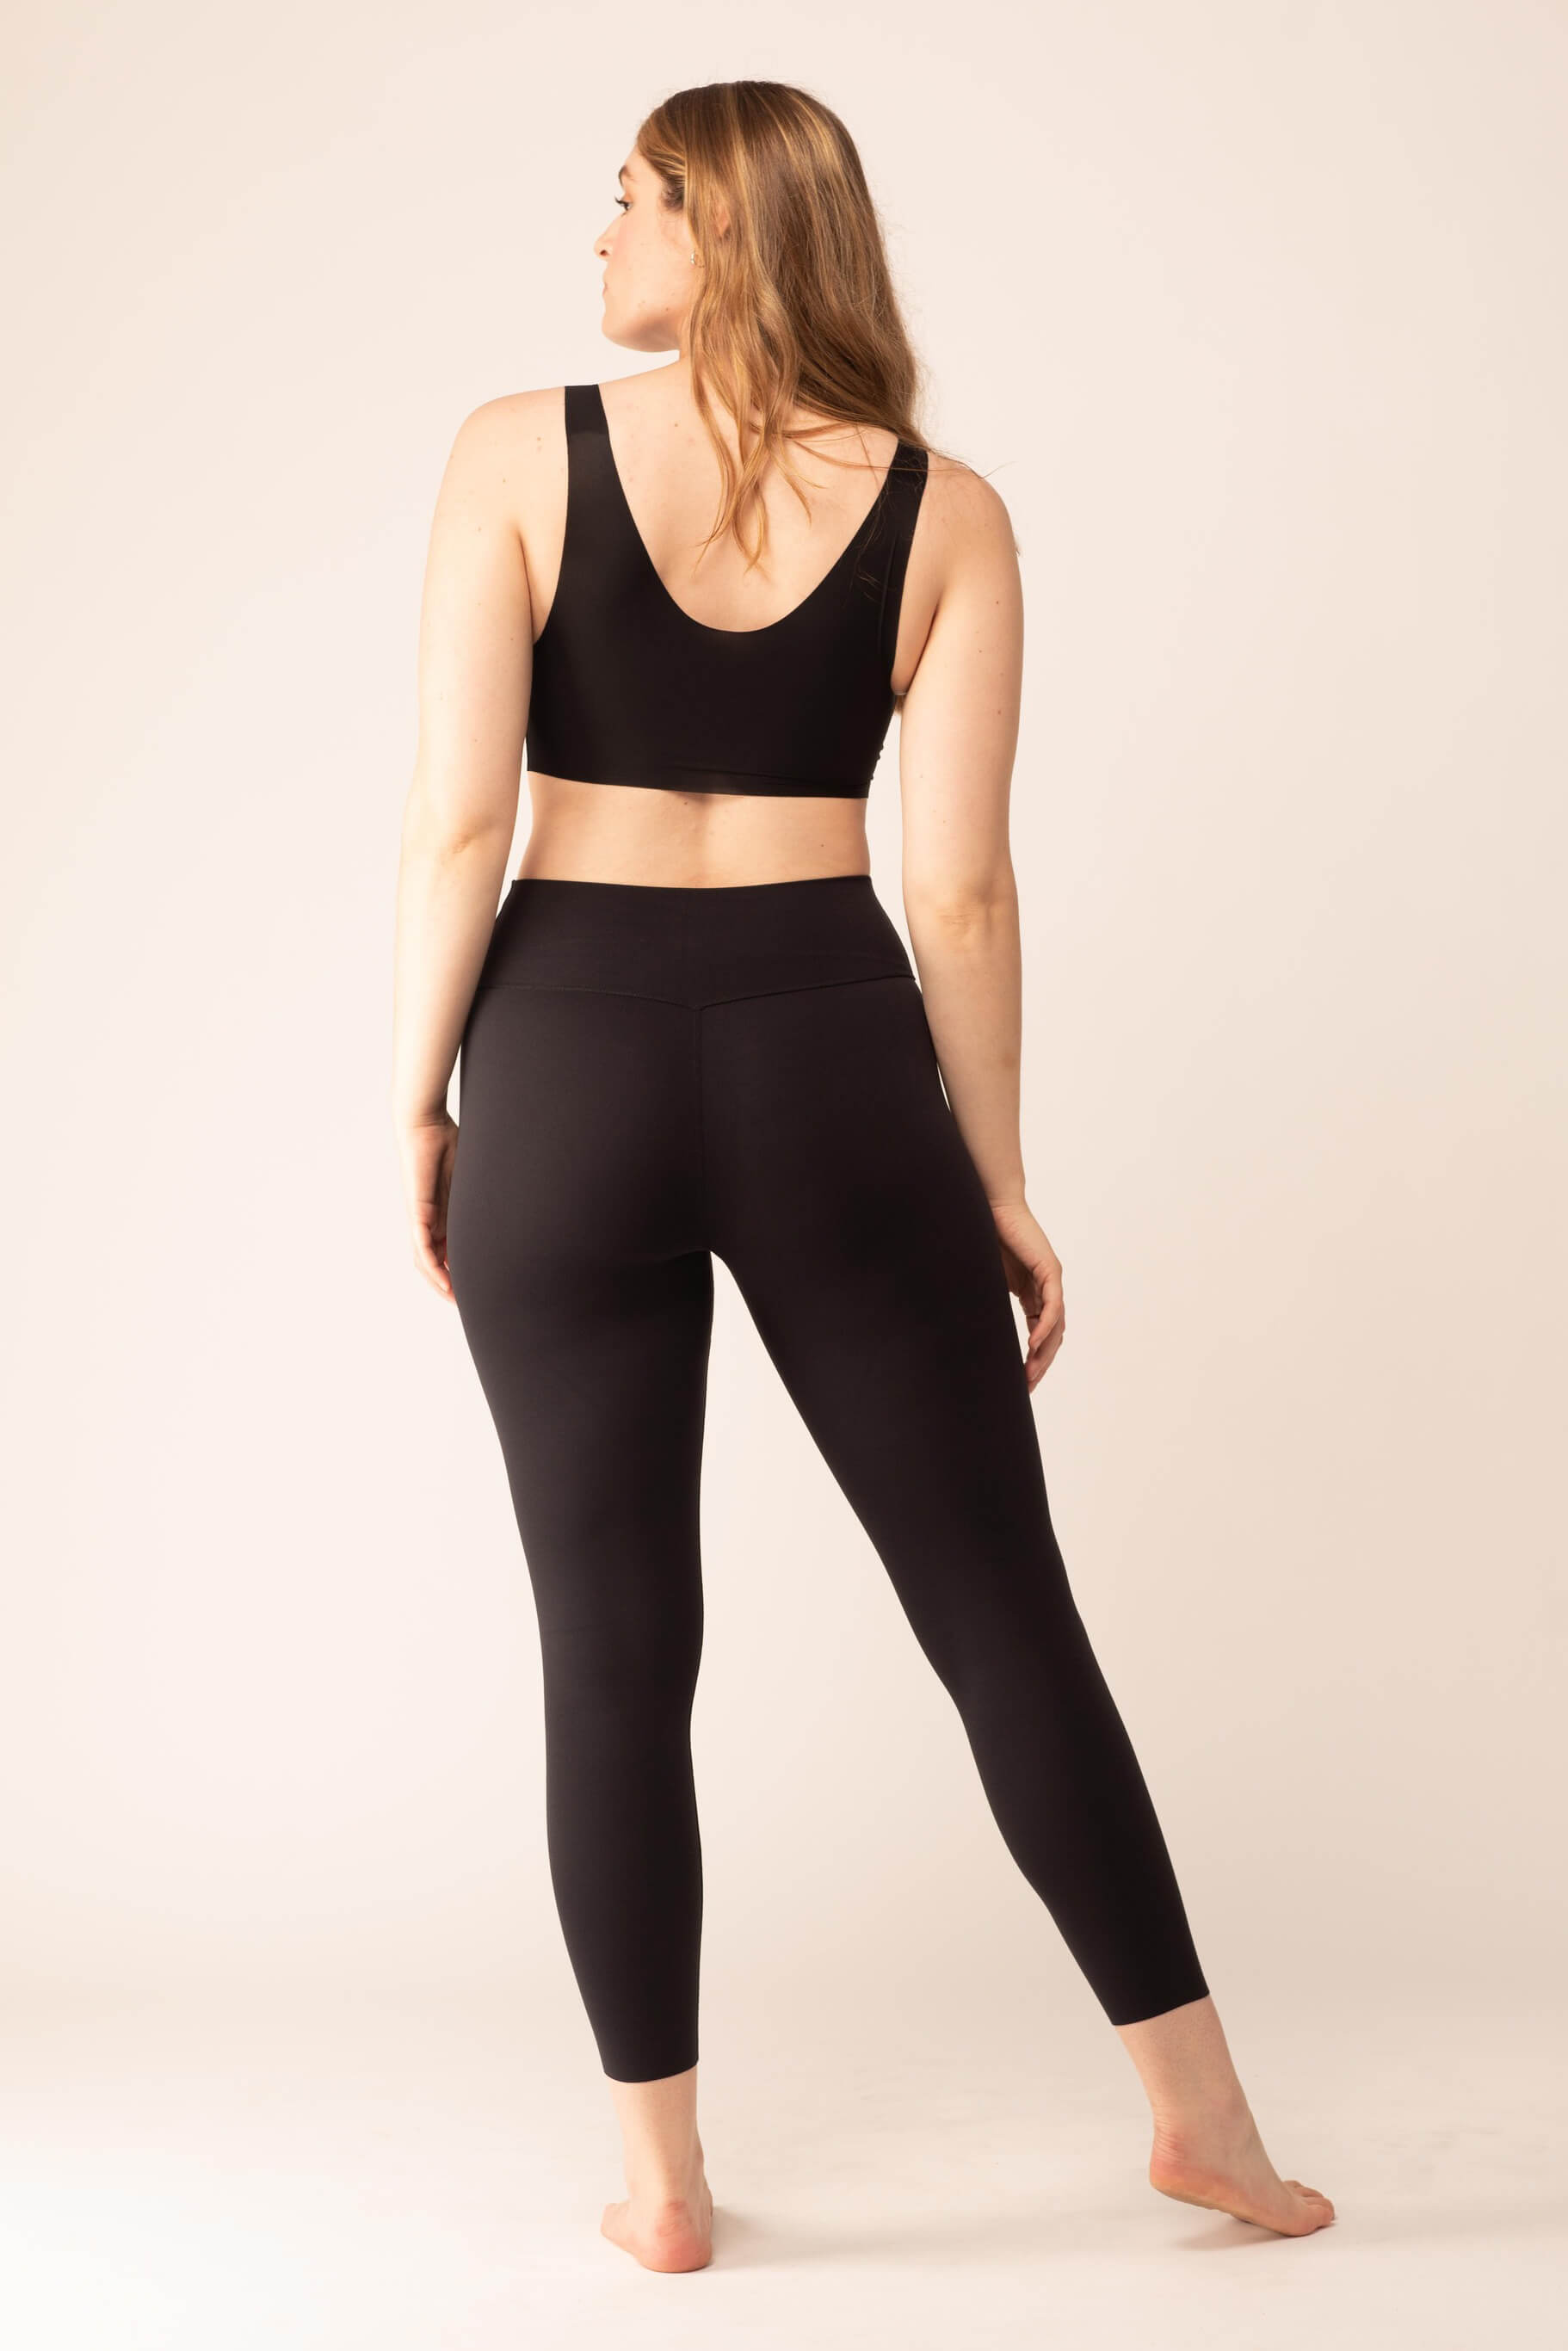 NWT CM Fashion Black Skinny Leggings with Side Pockets size XL - $23 New  With Tags - From Sustainable